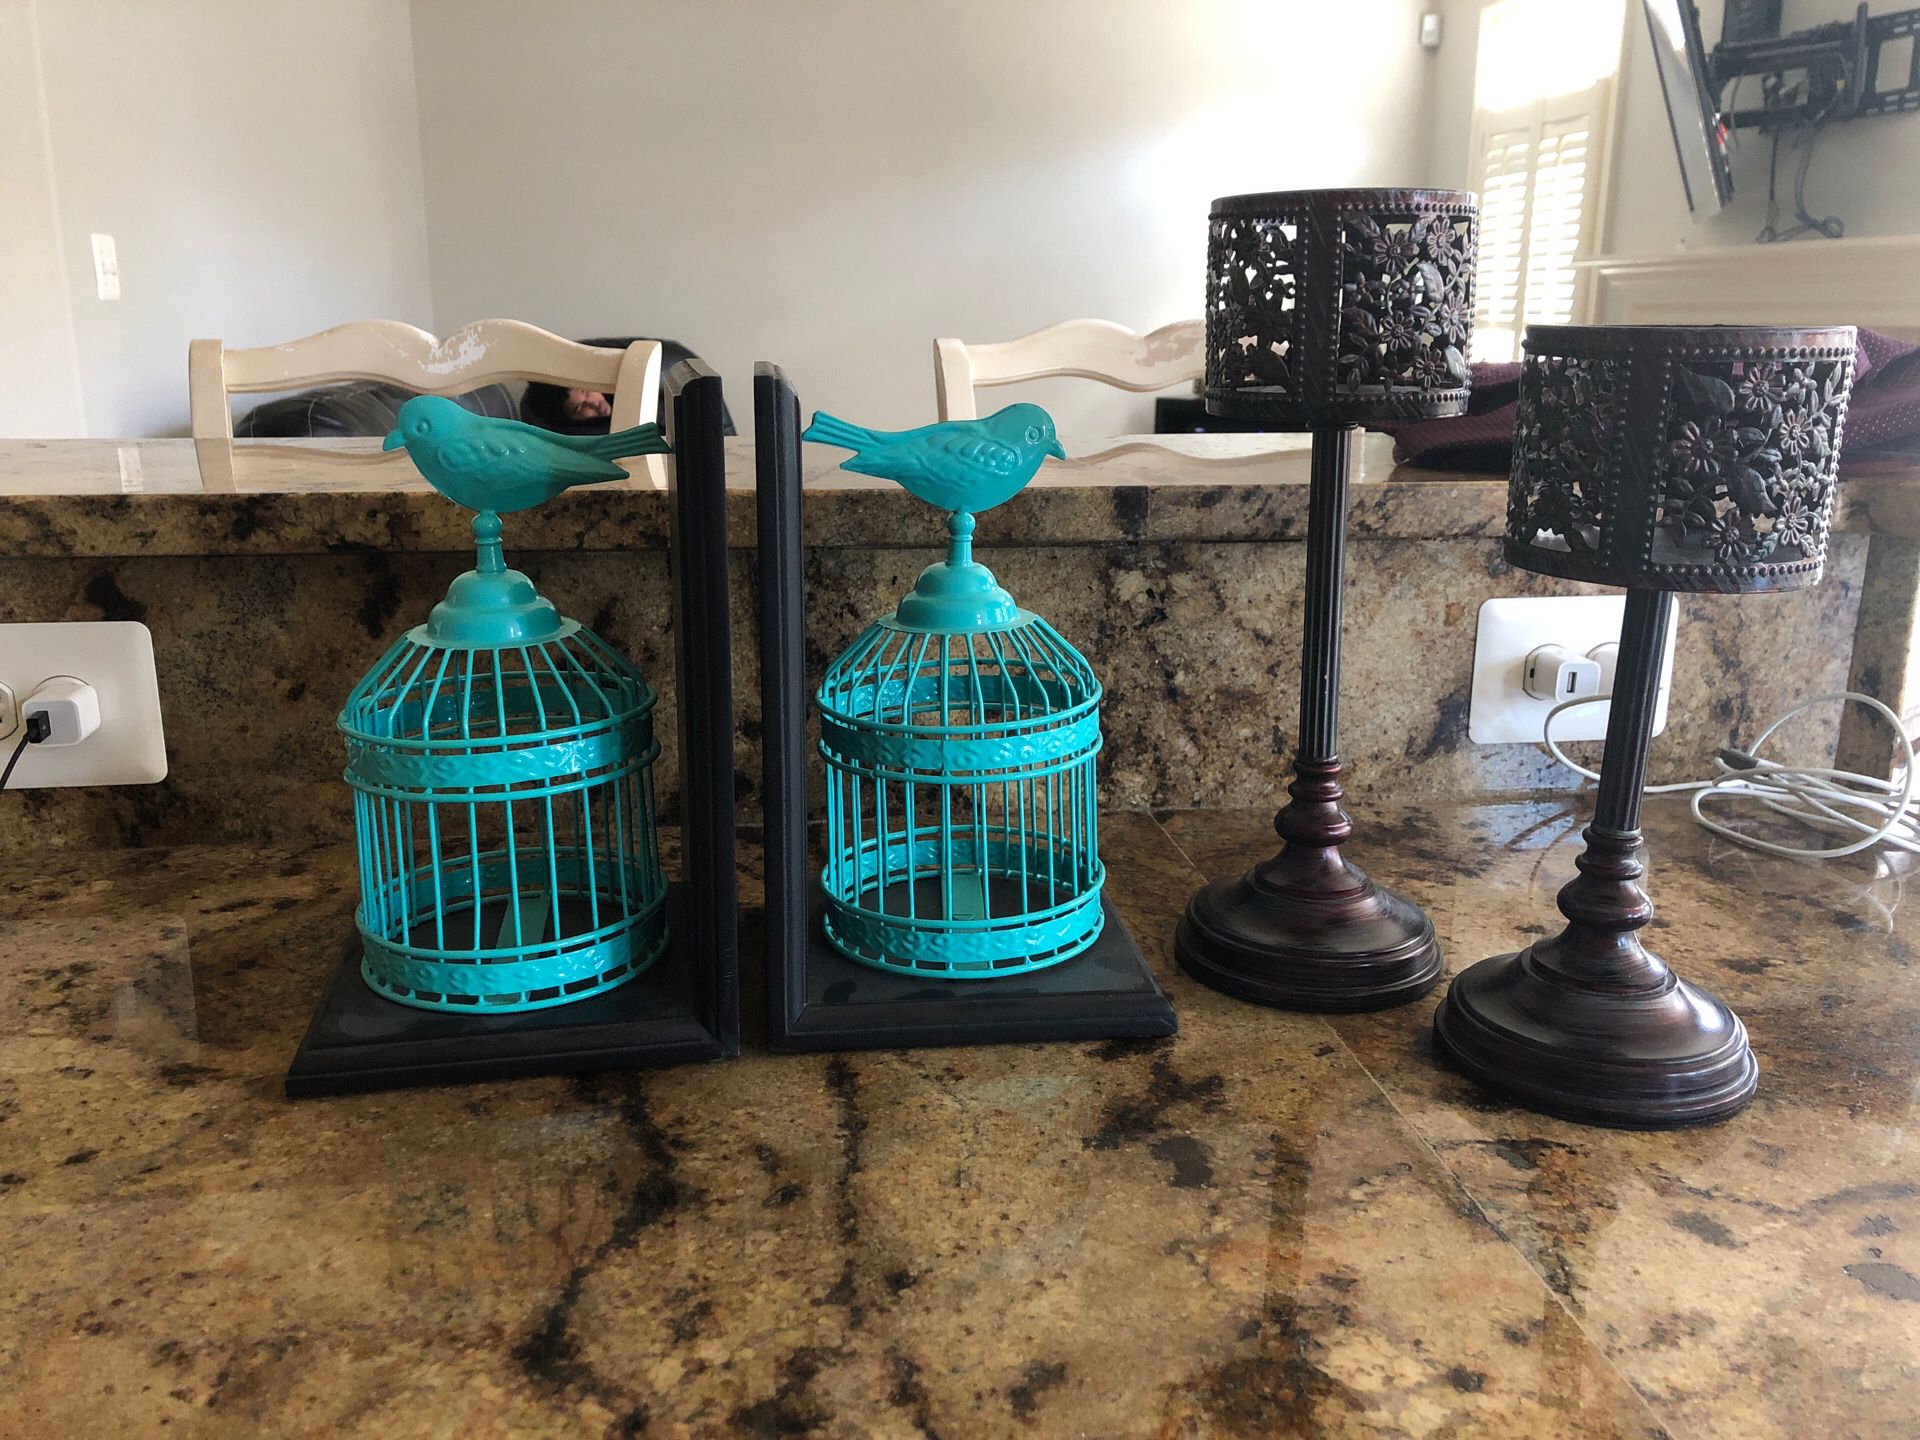 Set of book holders and candle holders